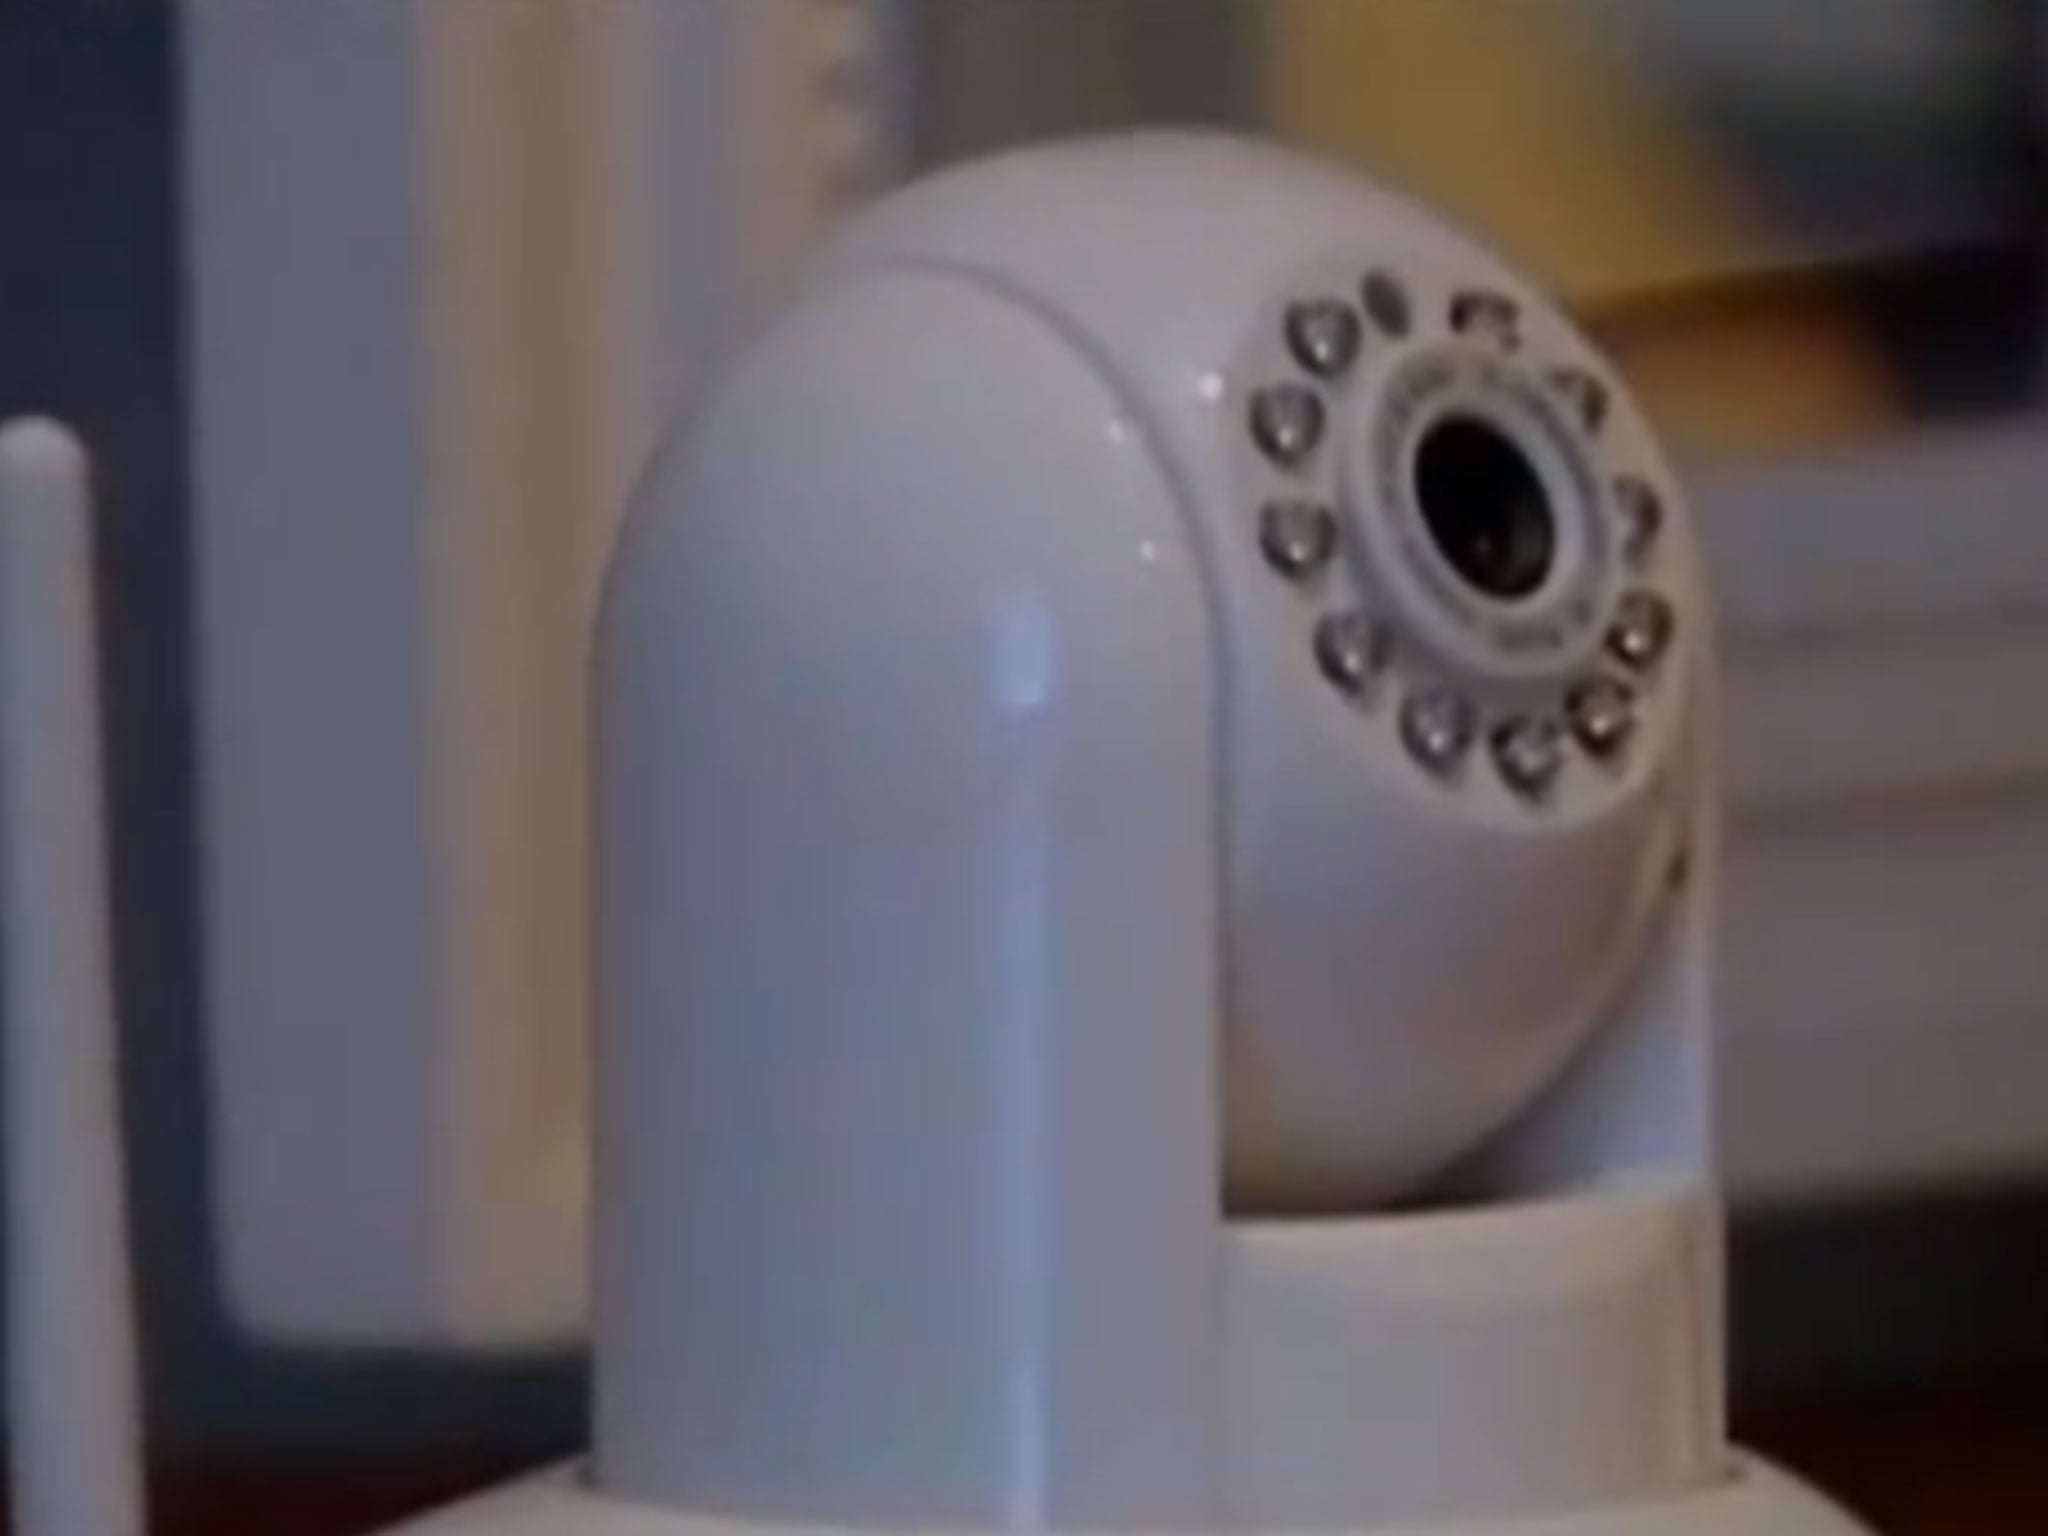 A Texas couple was horrified to discover their wireless baby monitor had been hacked by a stranger